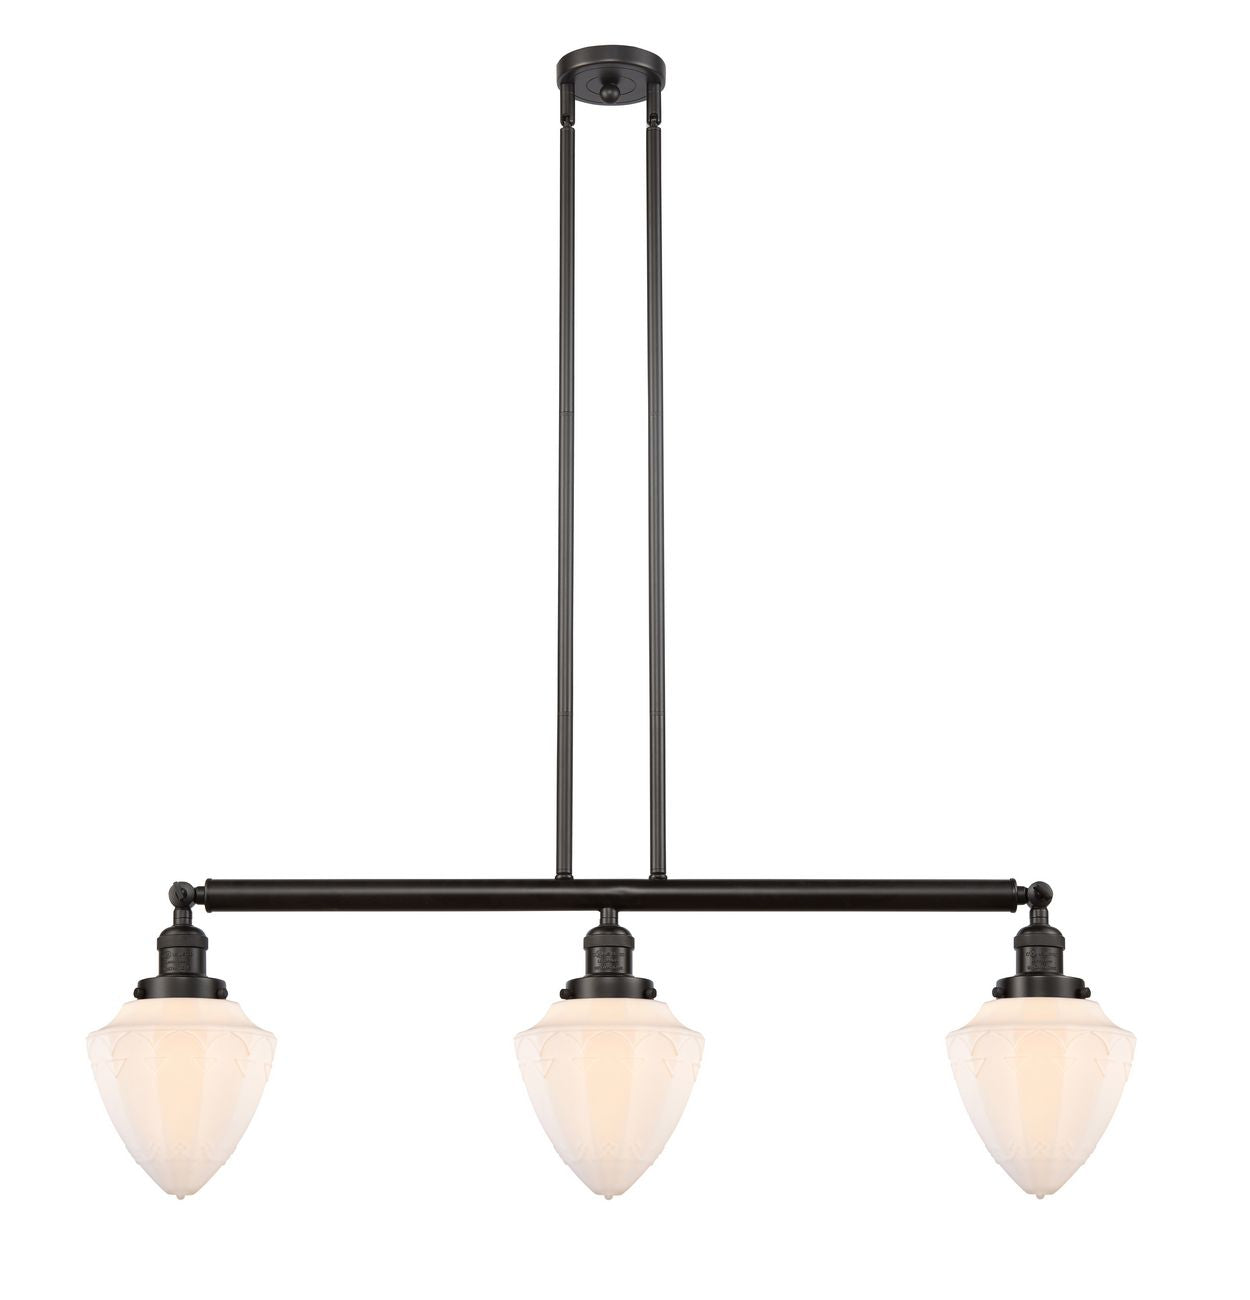 213-OB-G661-7 3-Light 38" Oil Rubbed Bronze Island Light - Matte White Cased Small Bullet Glass - LED Bulb - Dimmensions: 38 x 7 x 15.25<br>Minimum Height : 24.25<br>Maximum Height : 48.25 - Sloped Ceiling Compatible: Yes